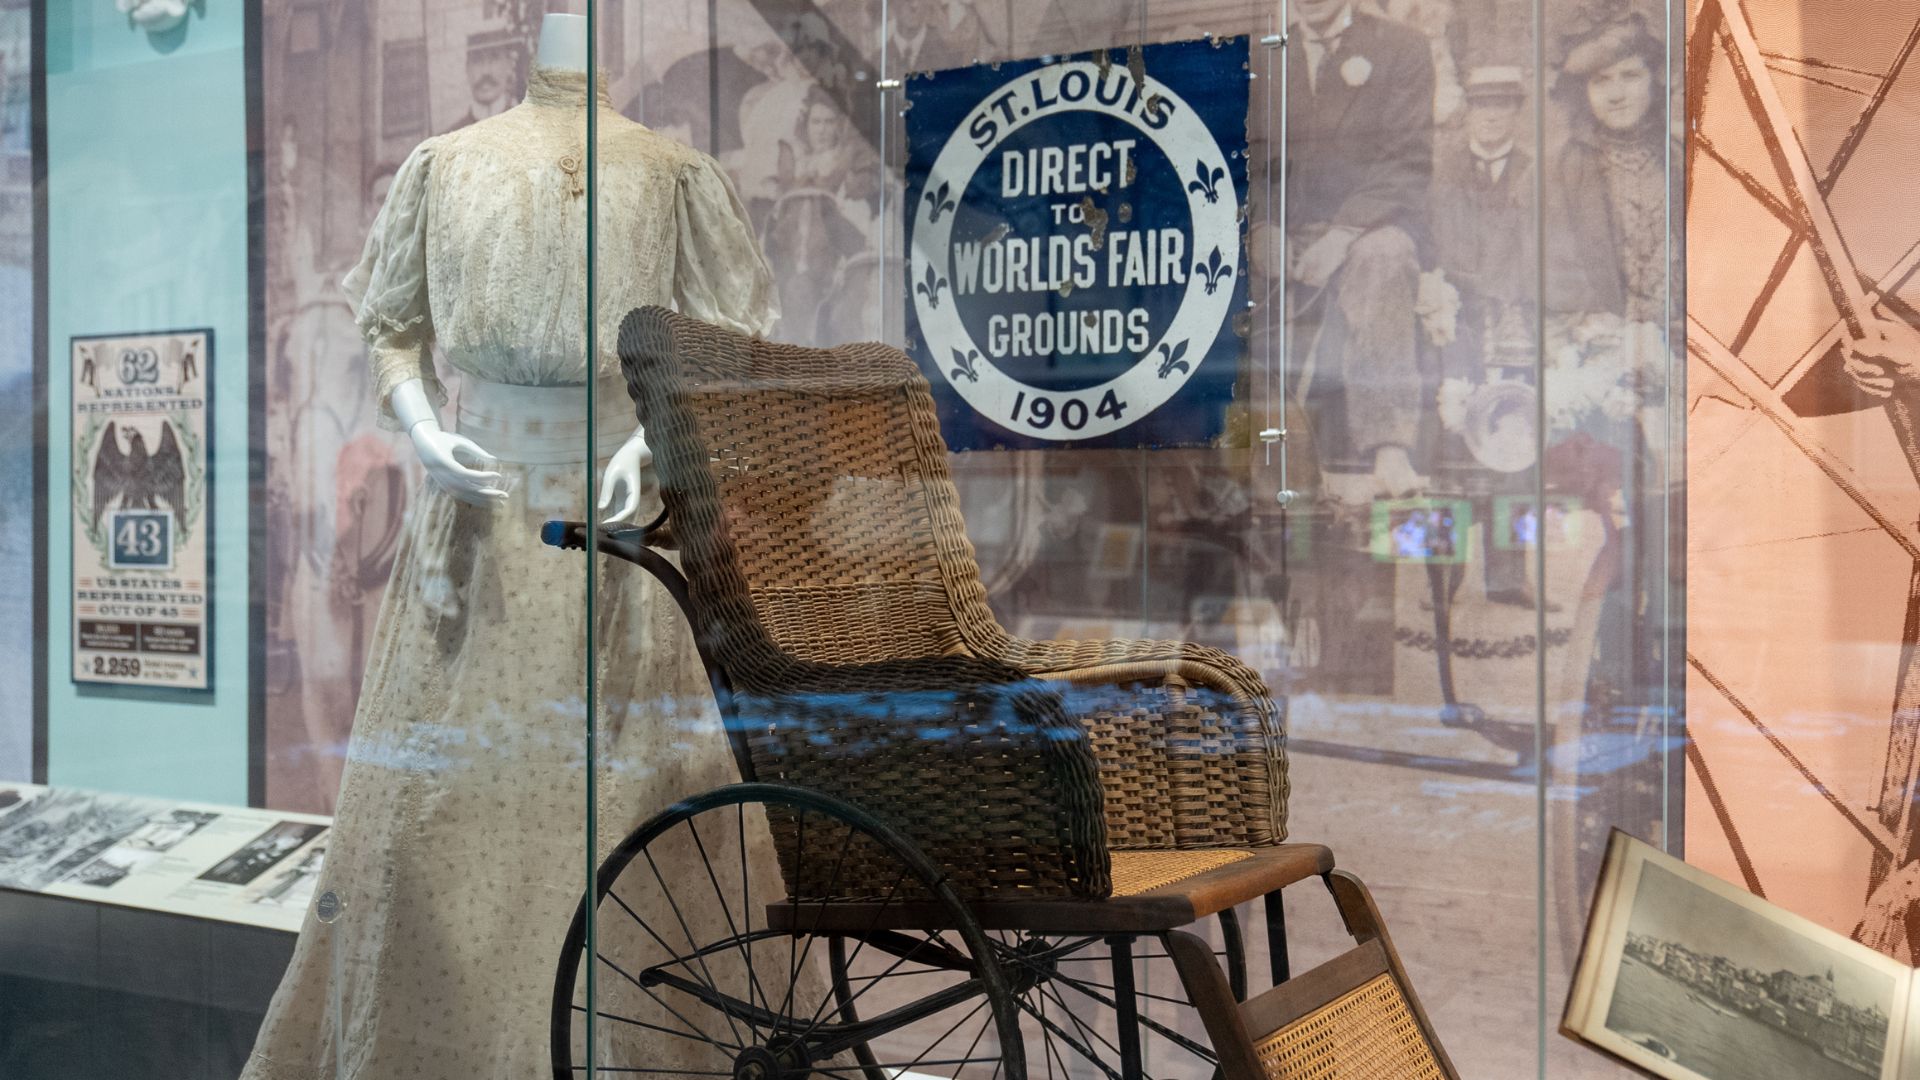 The 1904 World's Fair exhibit at the Missouri History Museum addresses the excitement and the challenges of the moment.